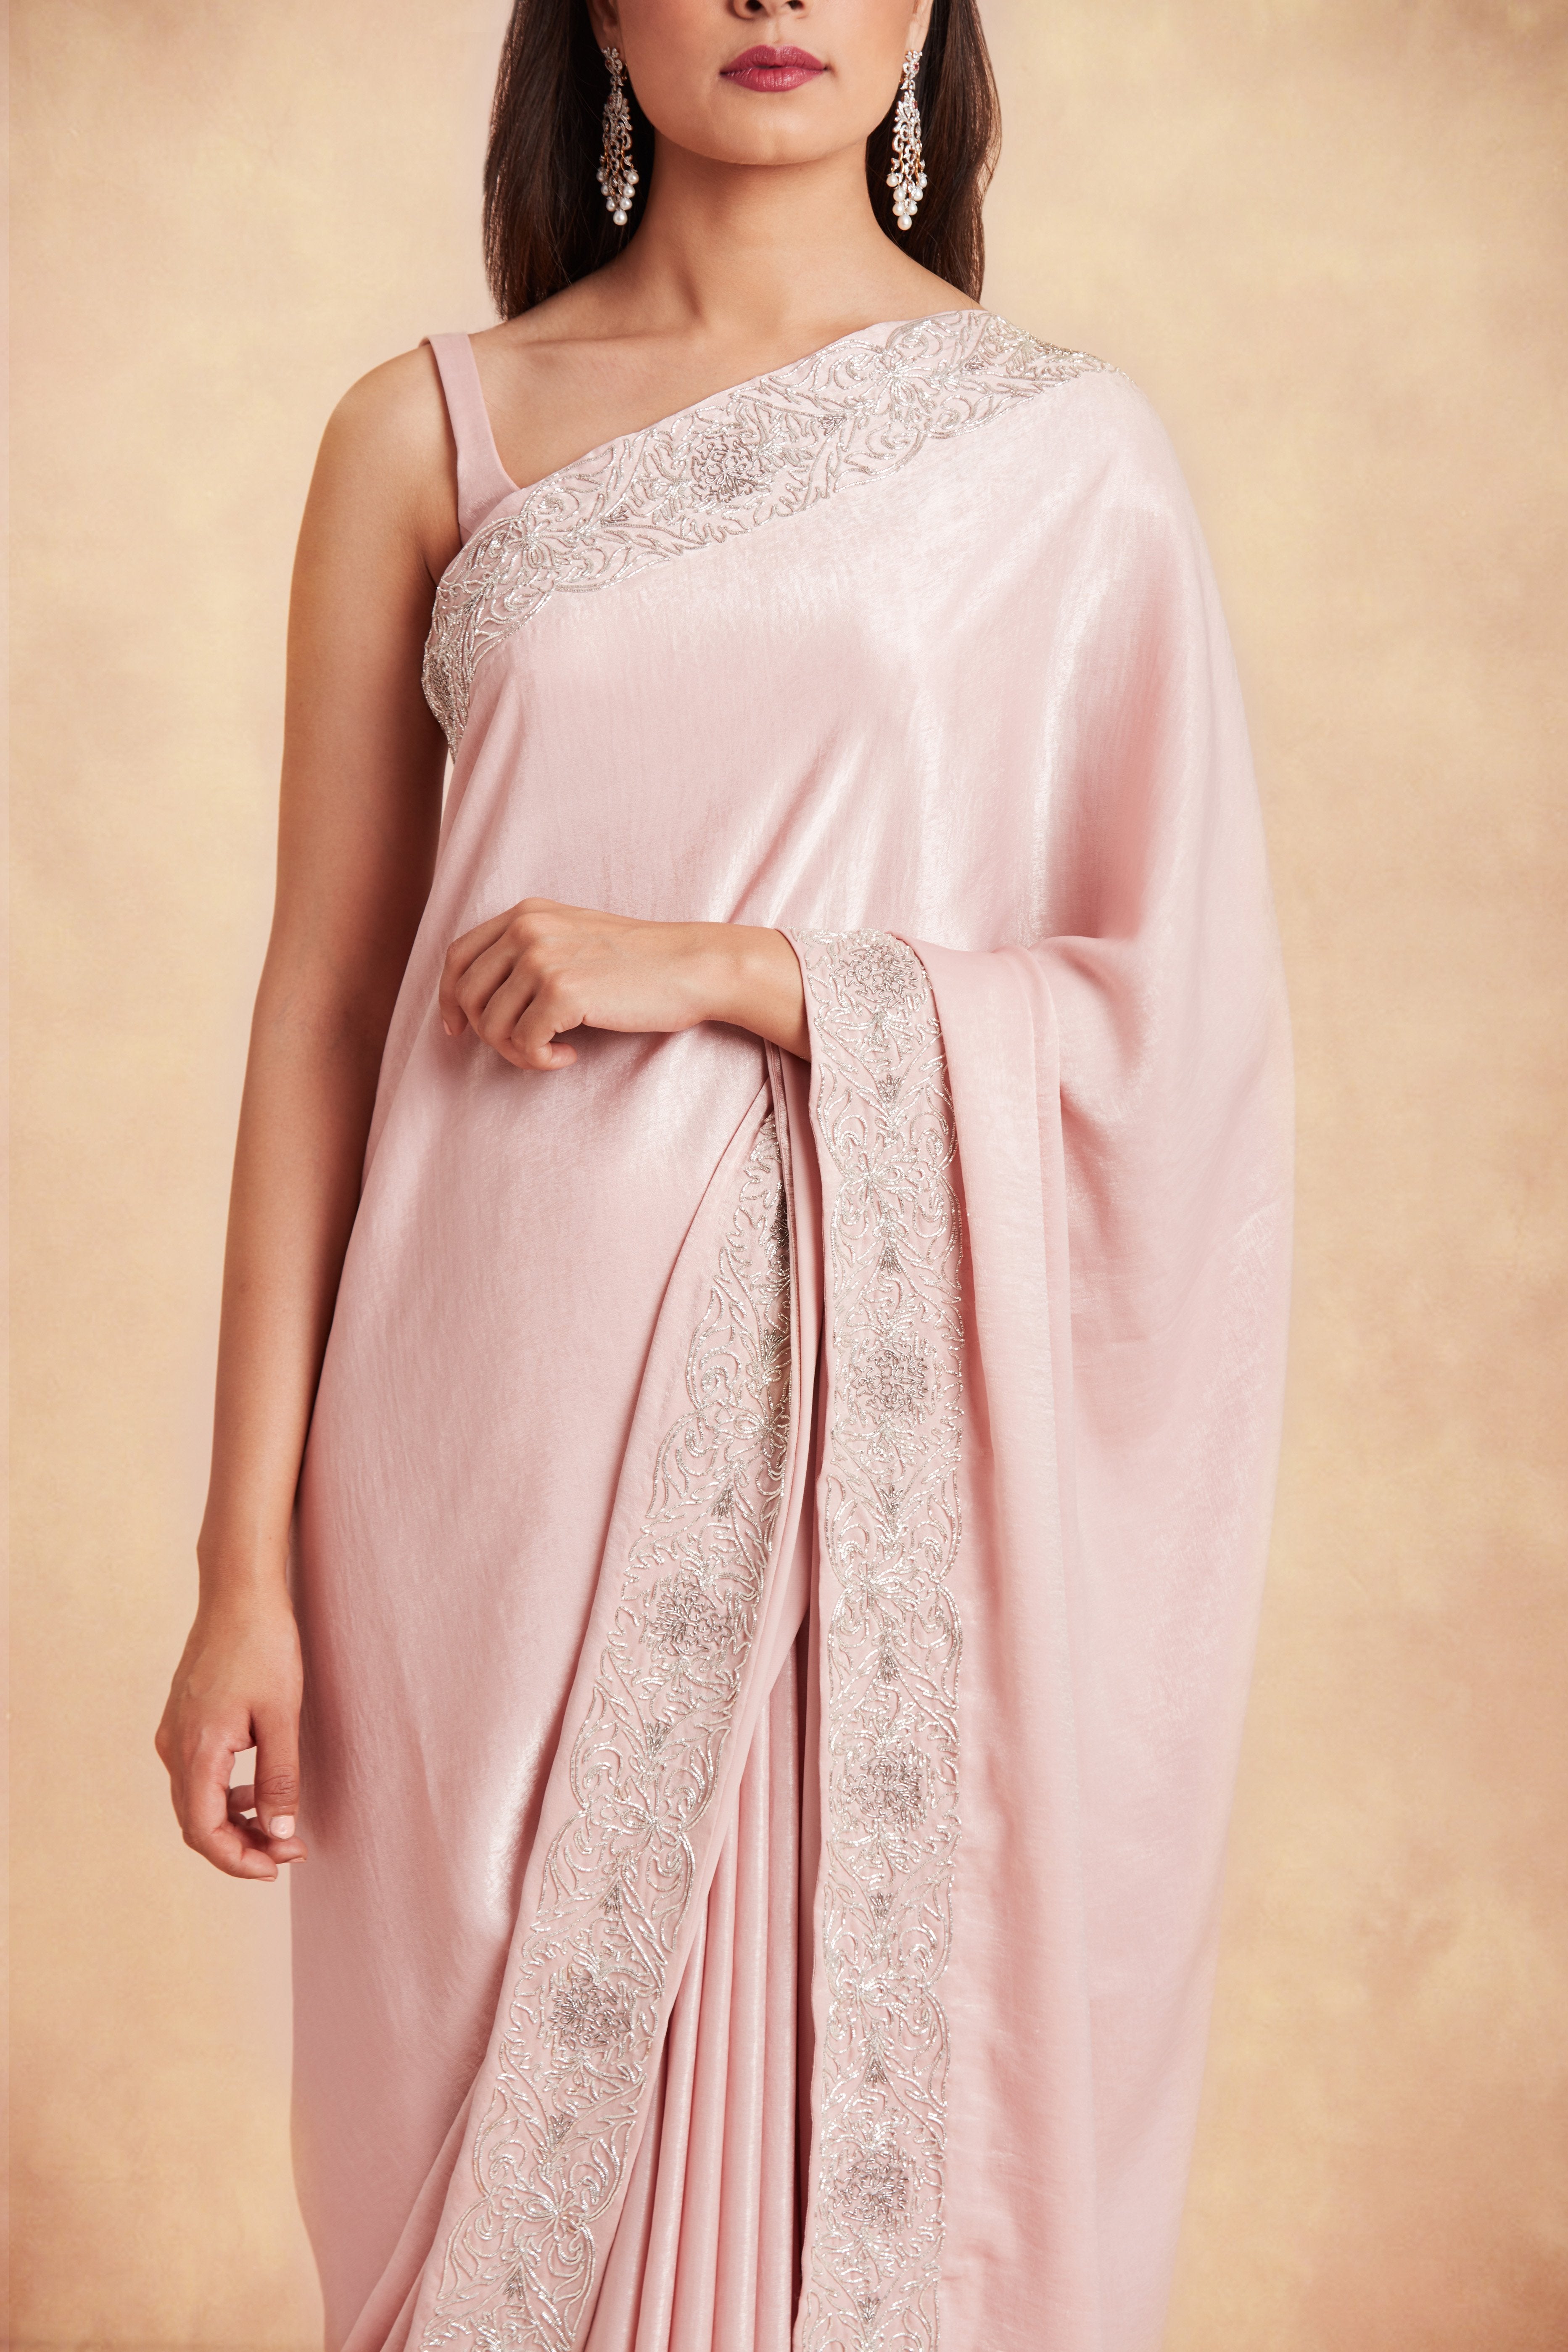 Sanjhana Reddy - Pink hand embroidered saree and blouse